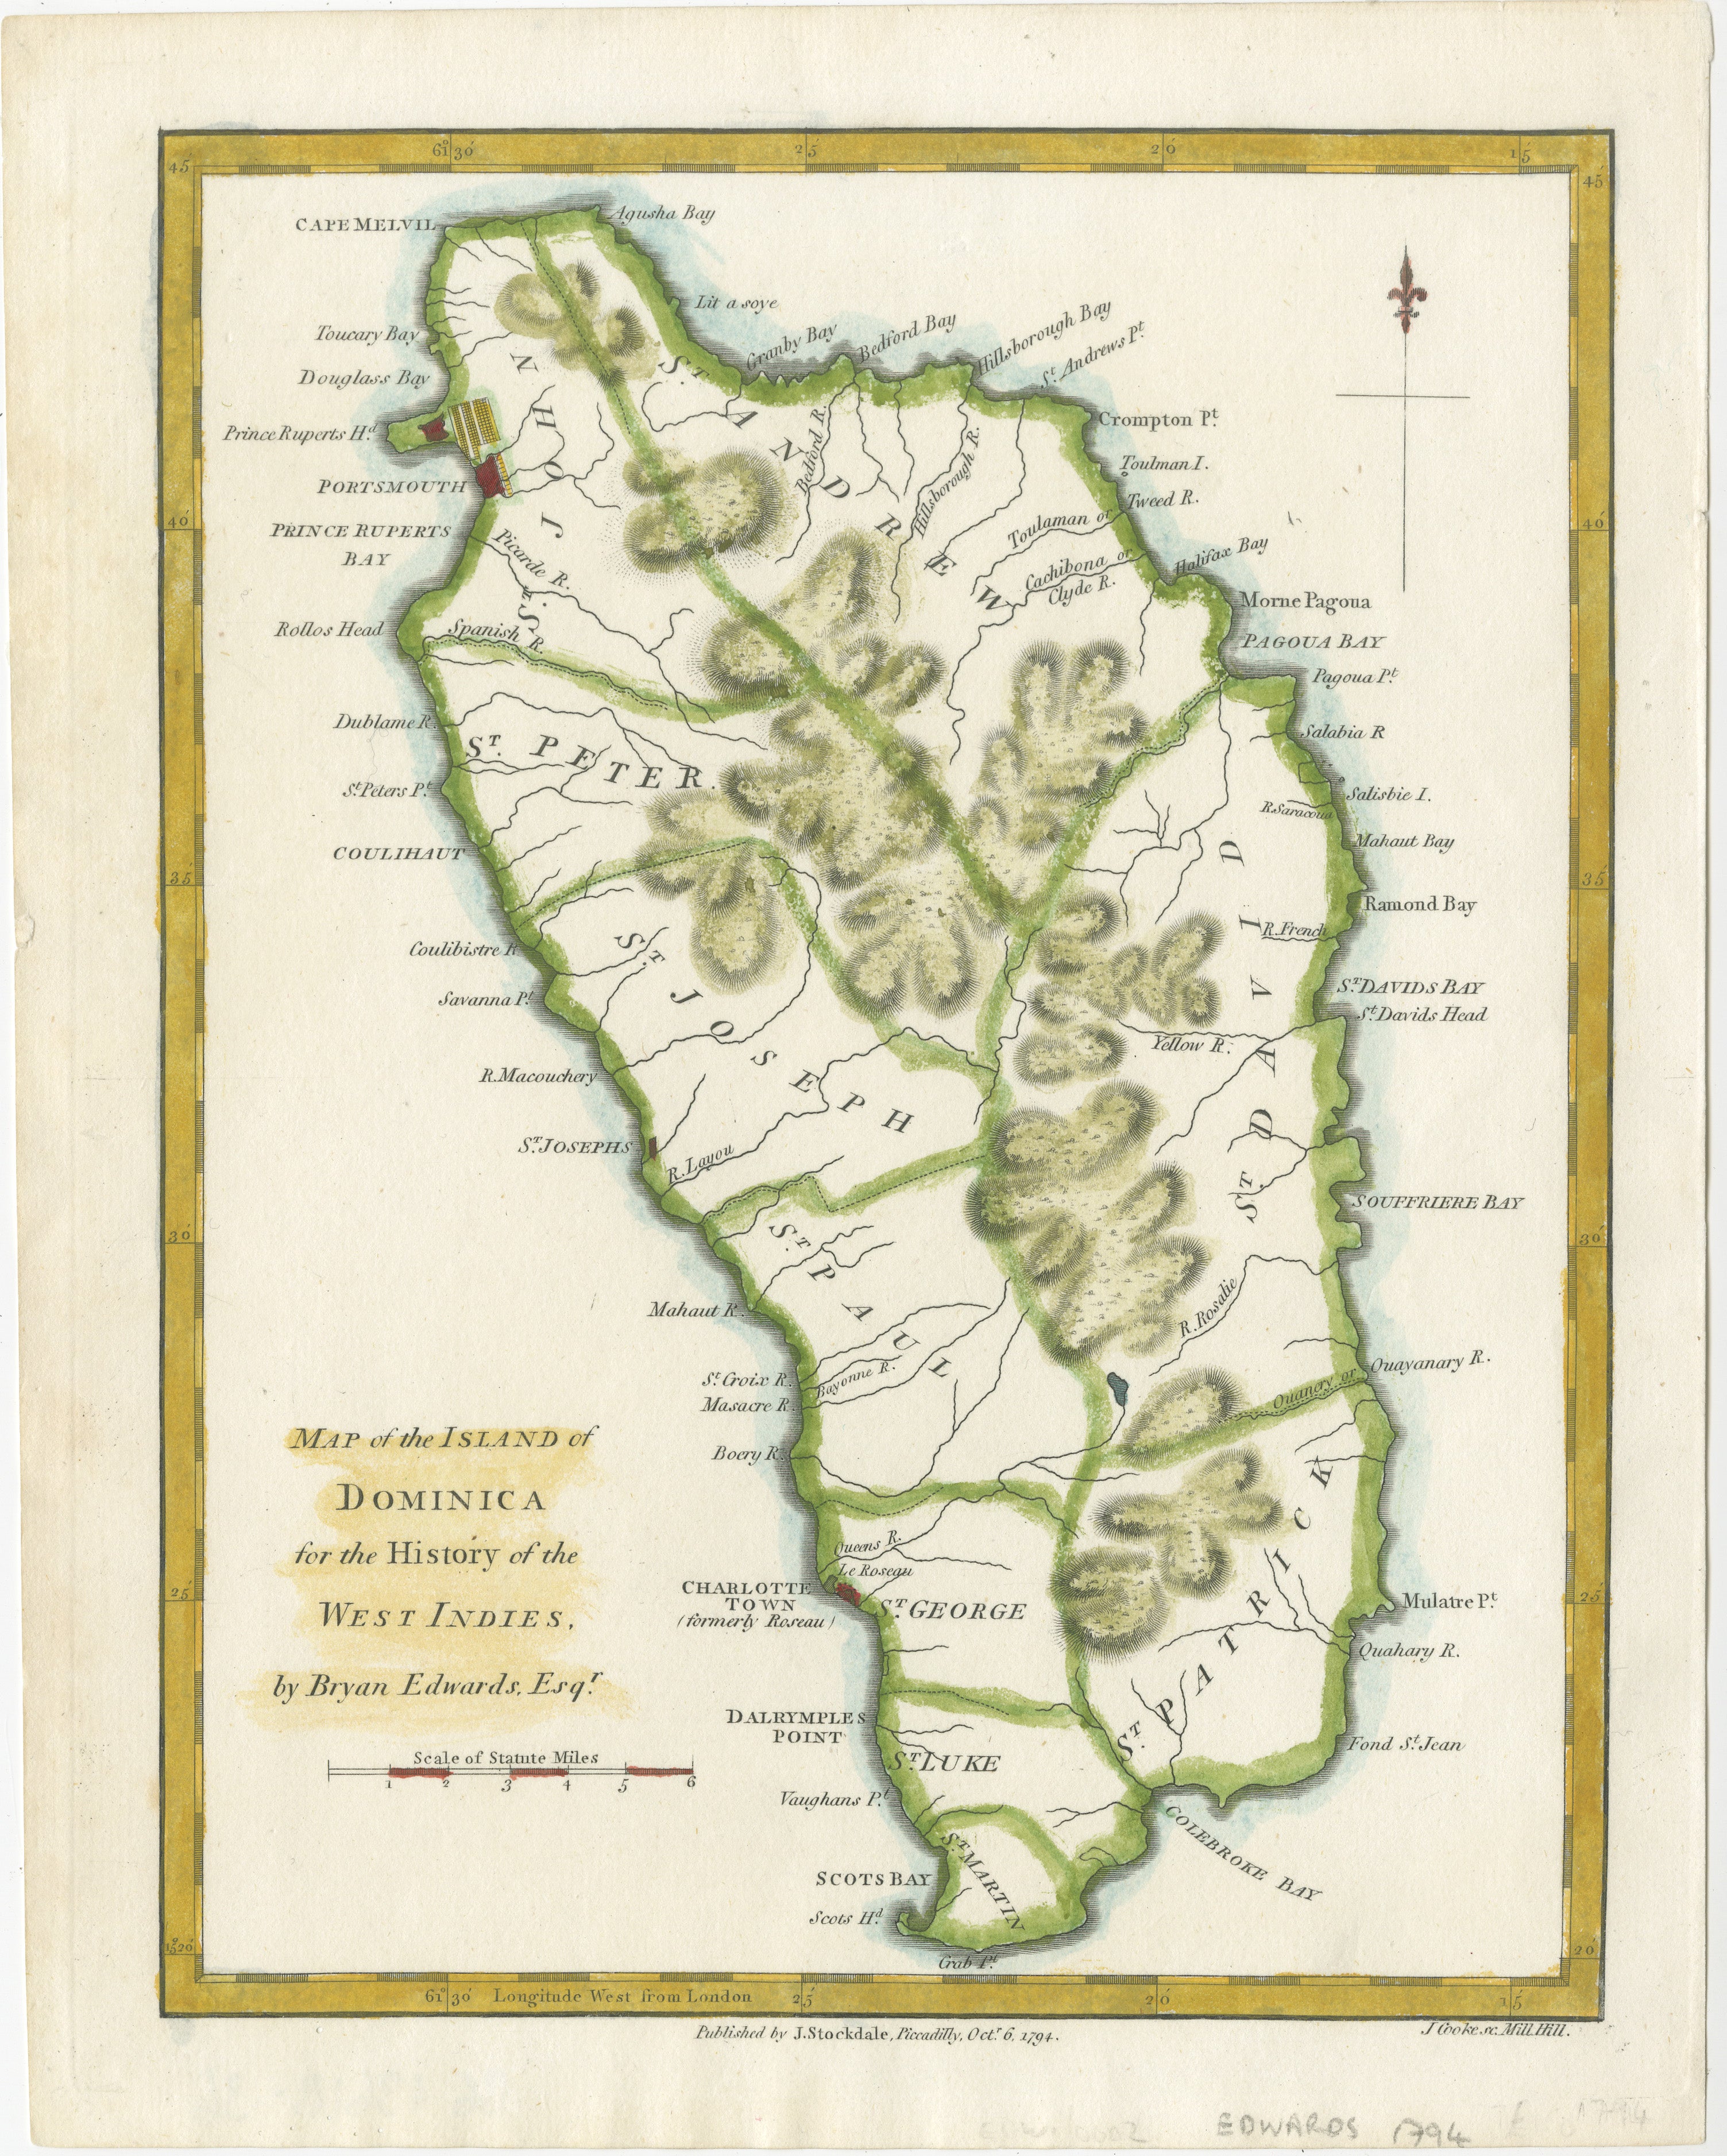 MAP OF THE ISLAND OF DOMINICA for the History of the West Indies, by Bryan Edwards. Esq.

Dominica, an island renowned for its lucrative exports of sugar, cocoa, and coffee, operated on a thriving but deeply troubling slave-based economy during the